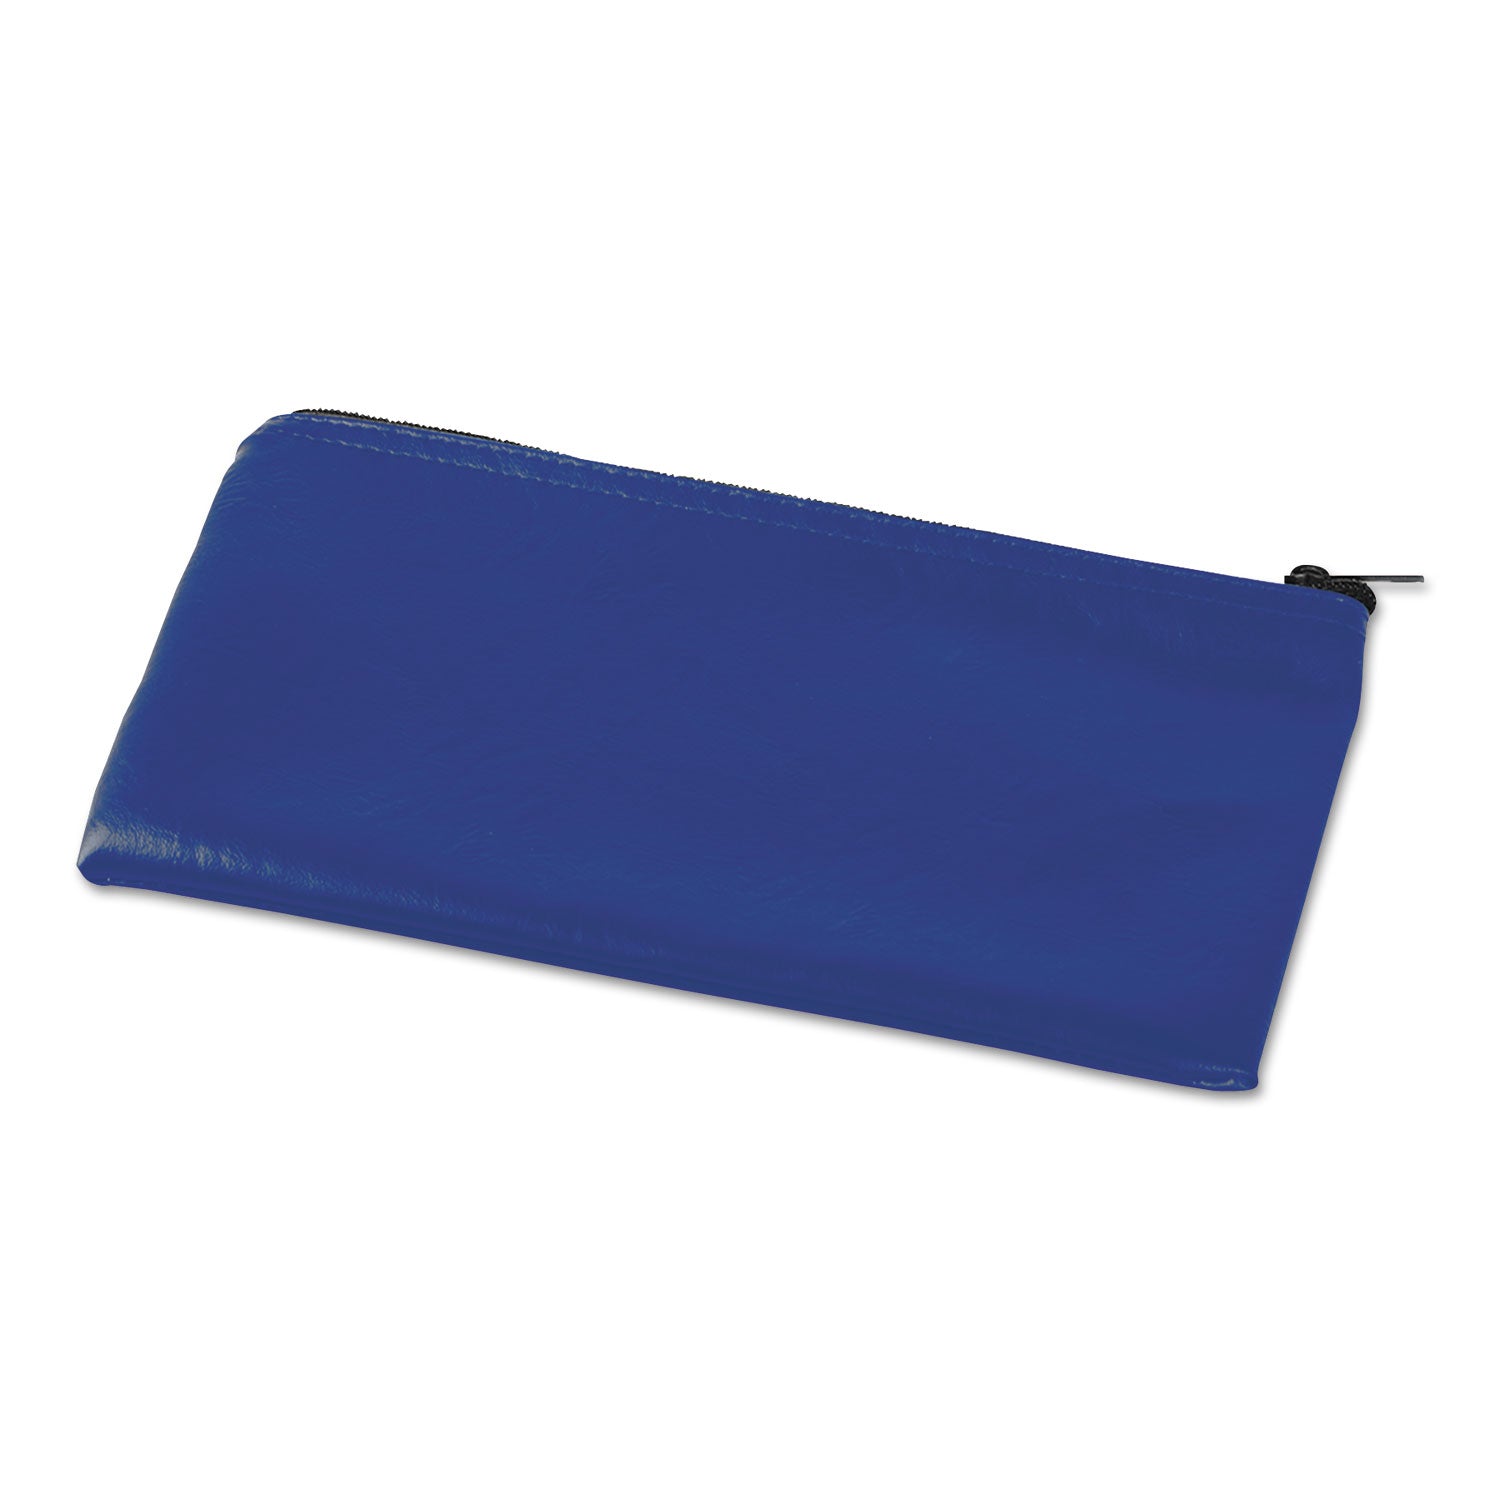 zippered-wallets-cases-leatherette-pu-11-x-6-blue-2-pack_unv69020 - 2